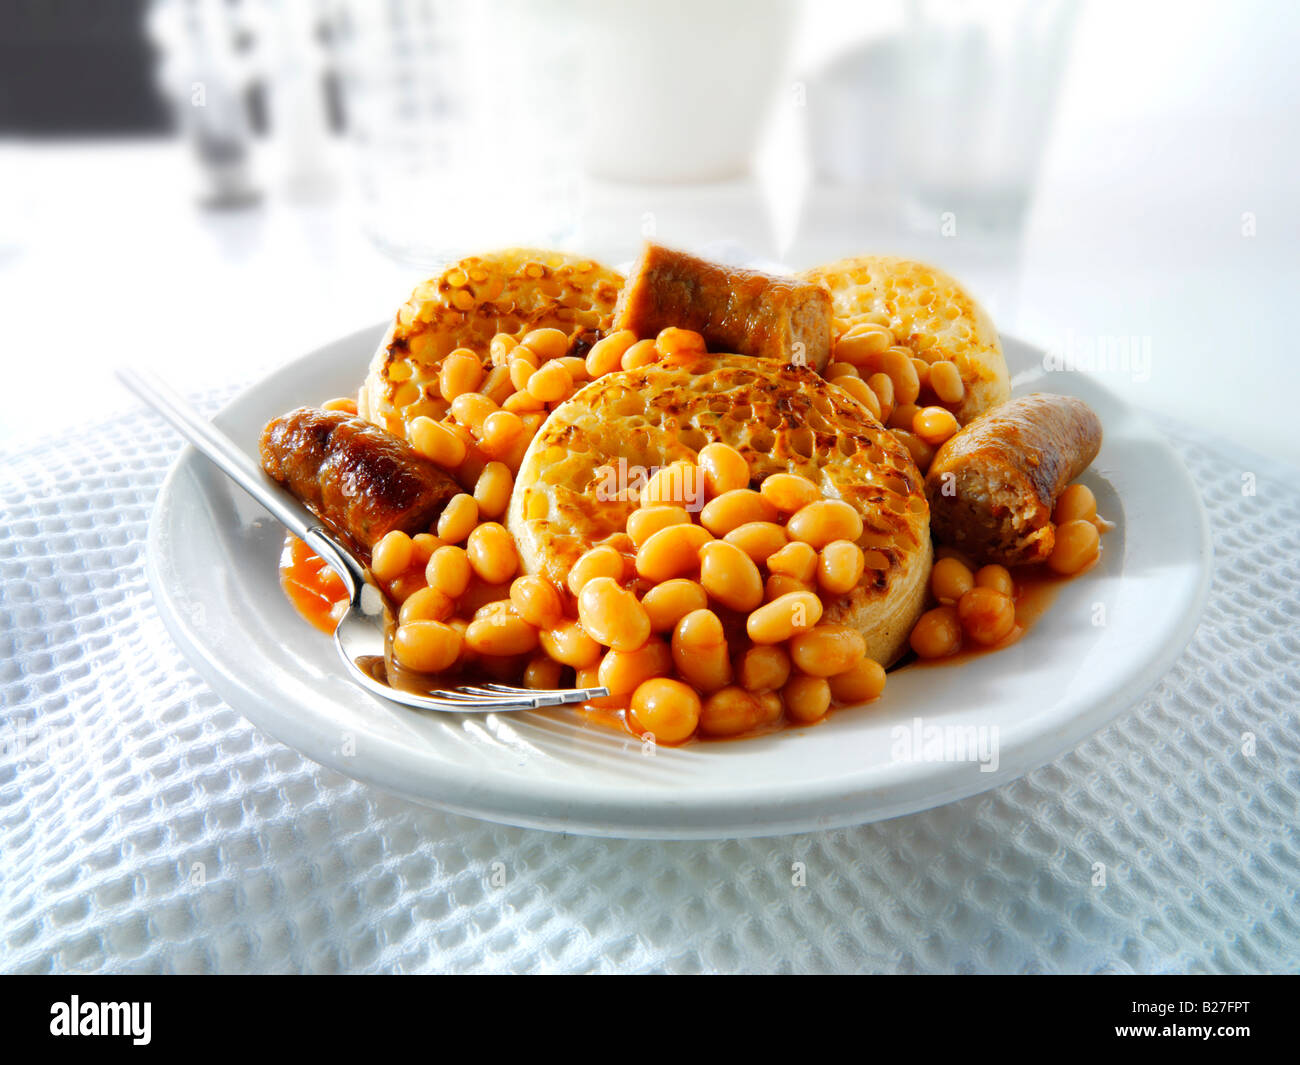 Baked beans and sausages on crumpets served as a meal on a white plate in a table setting Stock Photo